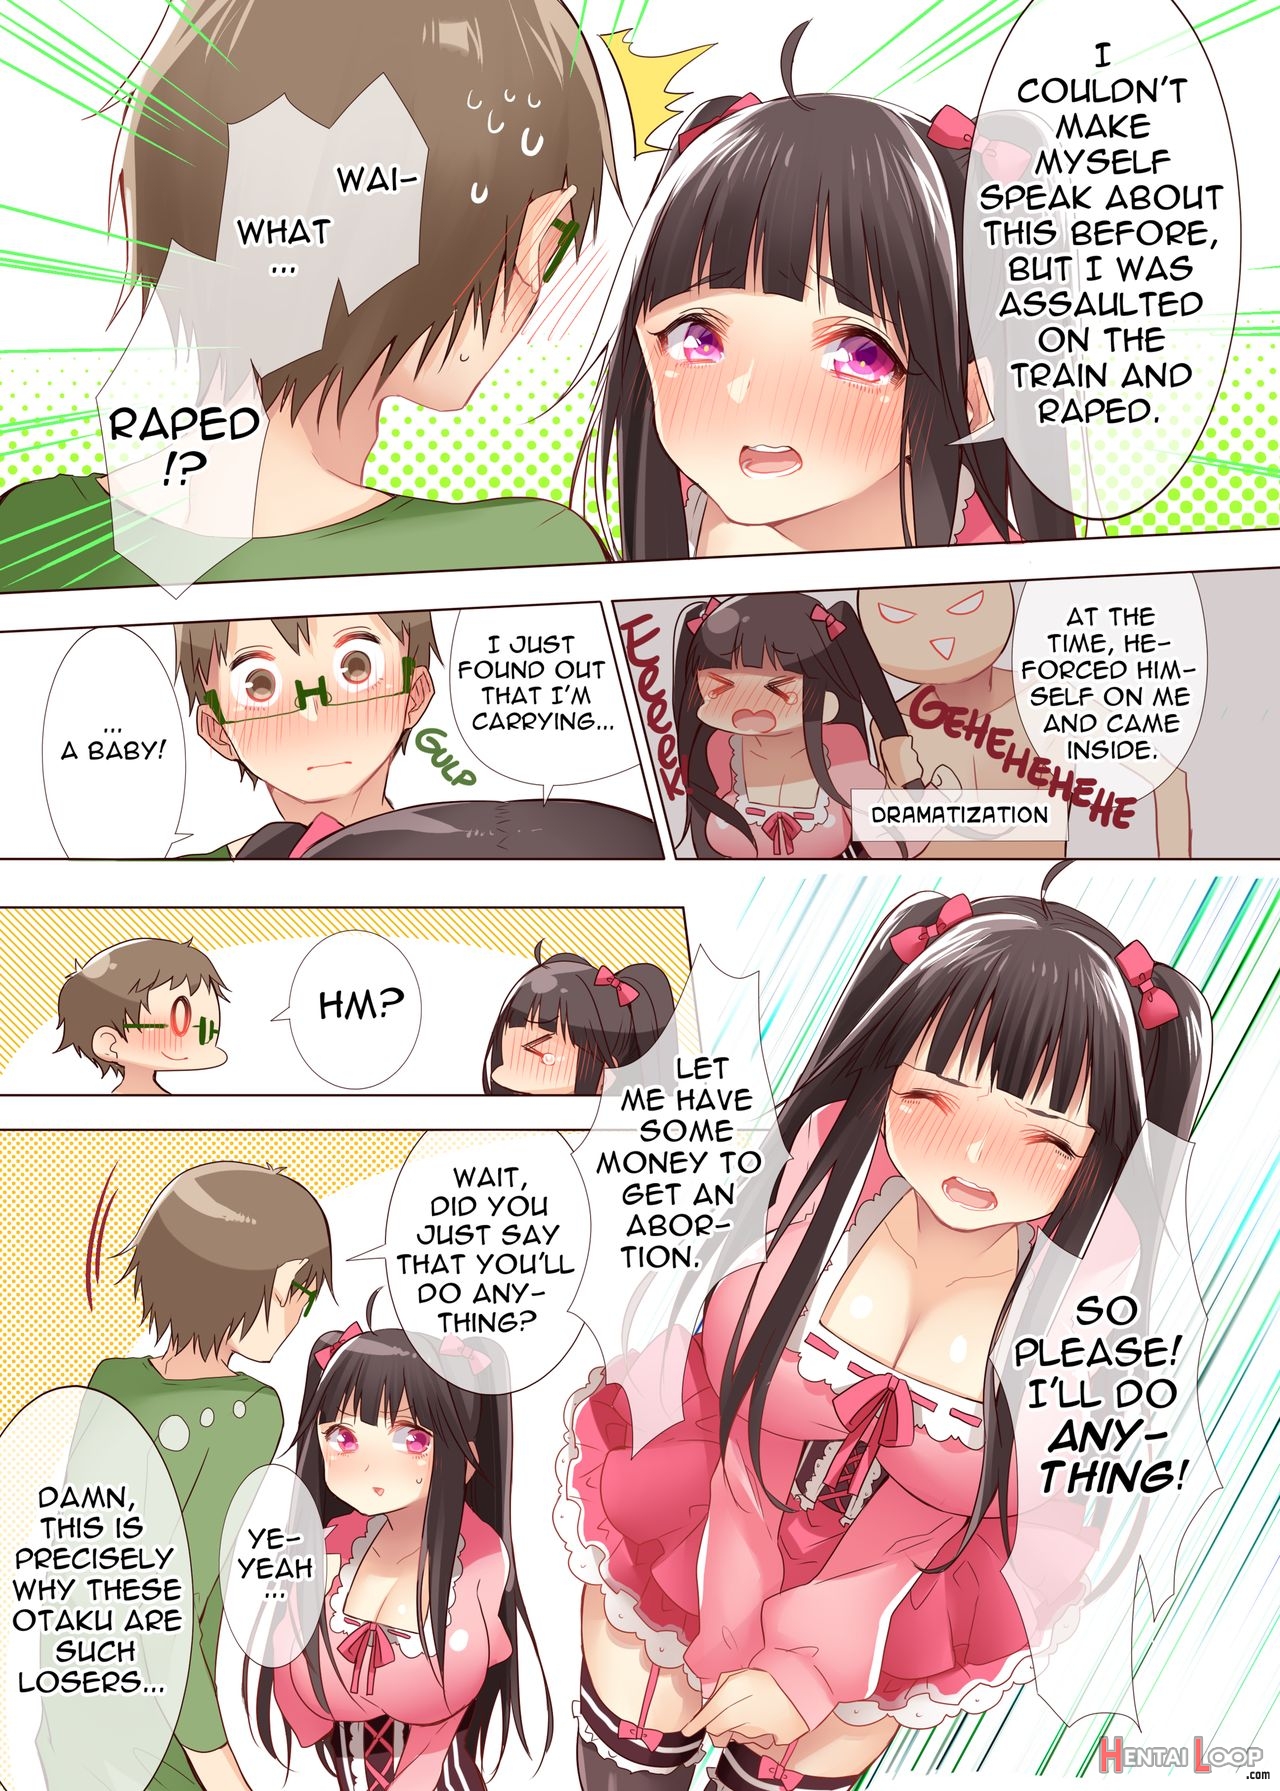 The Princess Of An Otaku Group Got Knocked Up By Some Piece Of Trash So She Let An Otaku Guy Do Her Too!? page 16